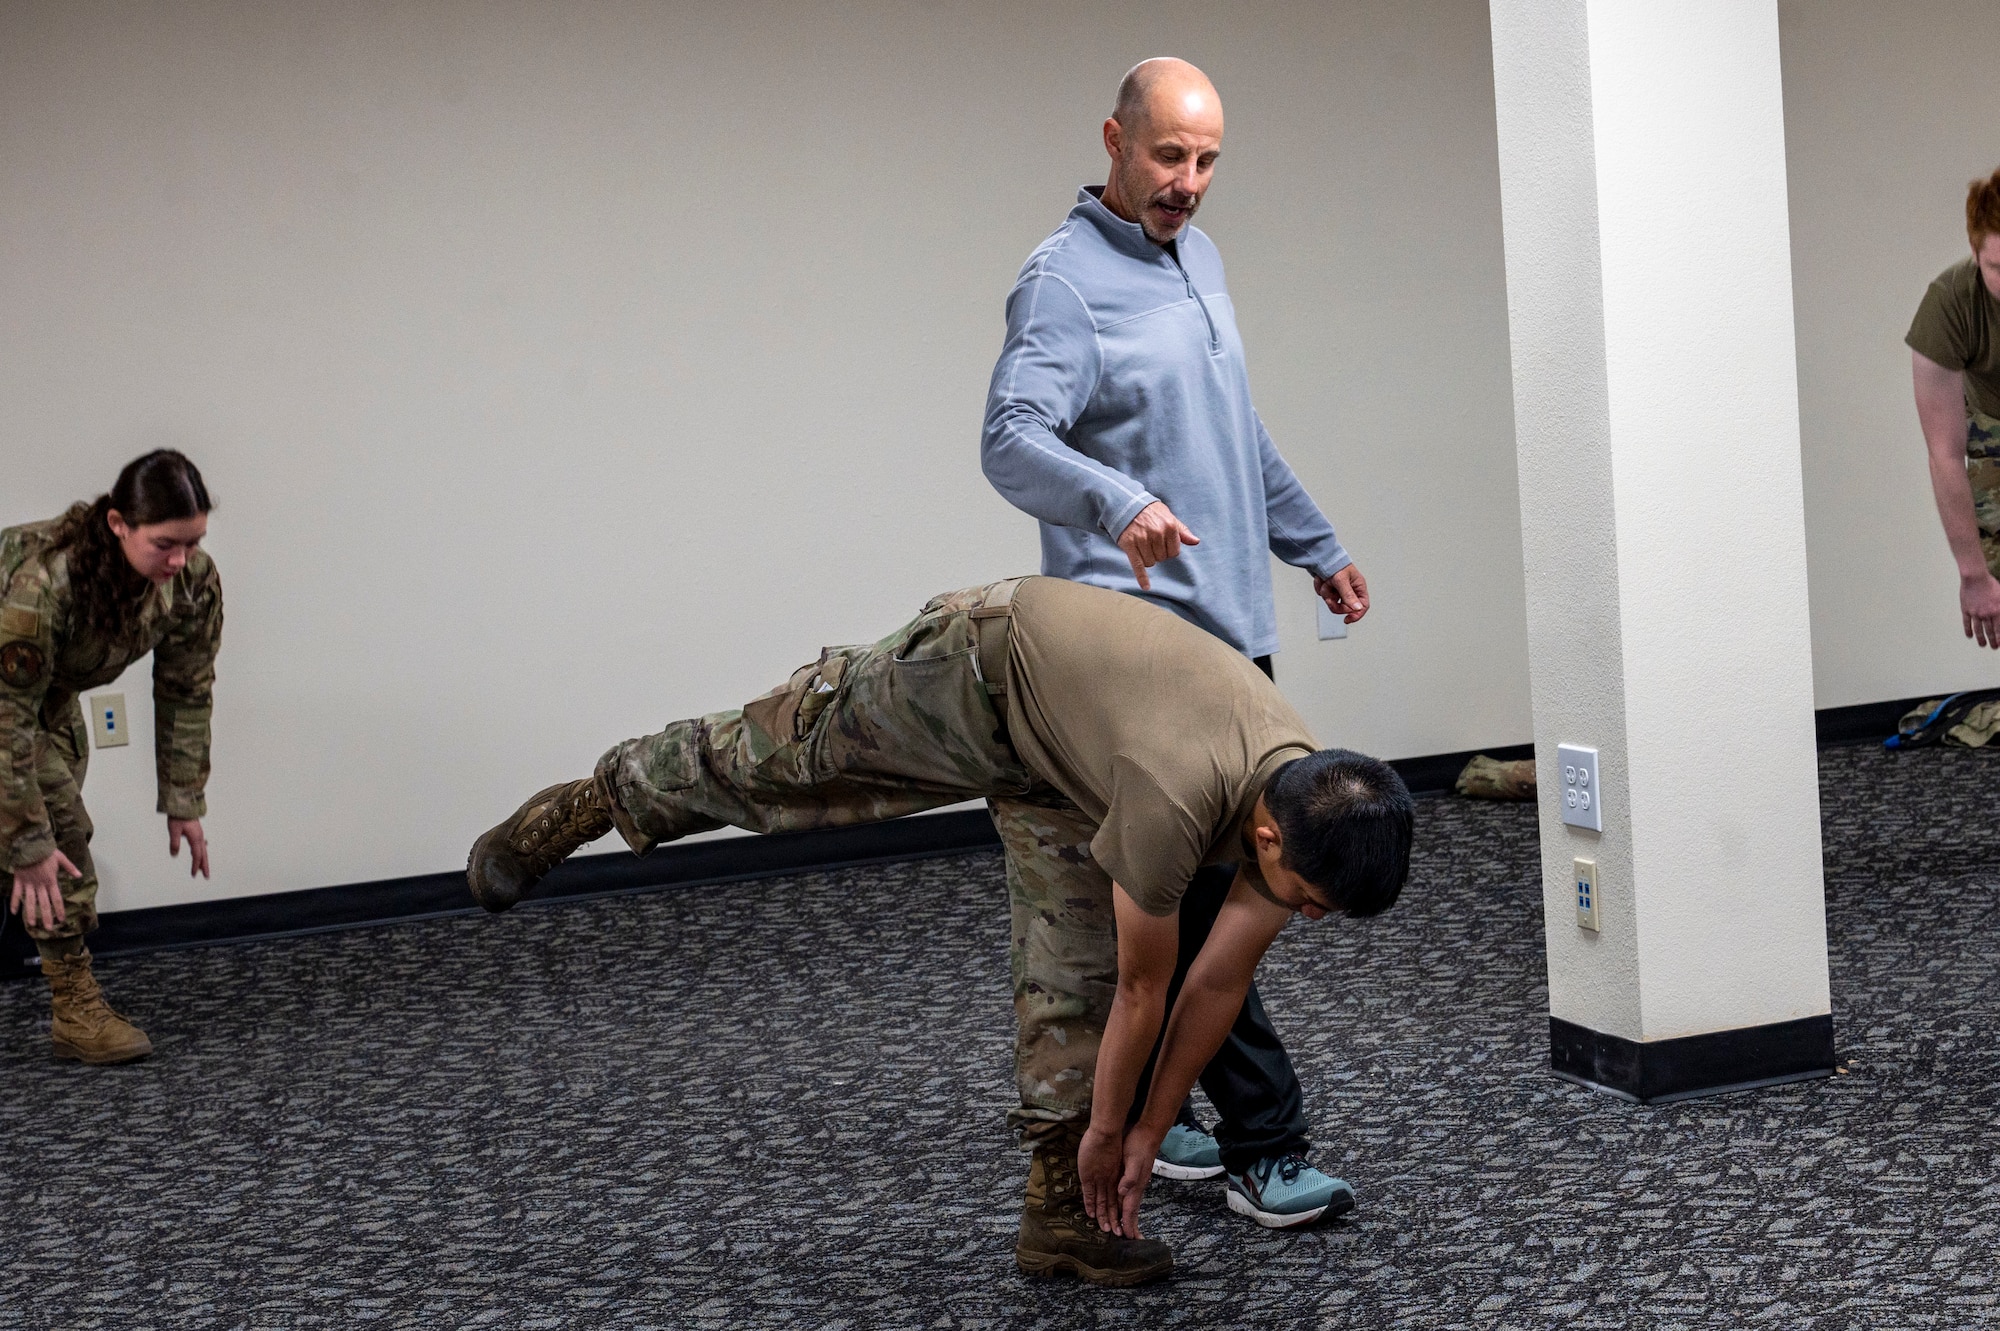 A man assists an Airman while doing a stretch.